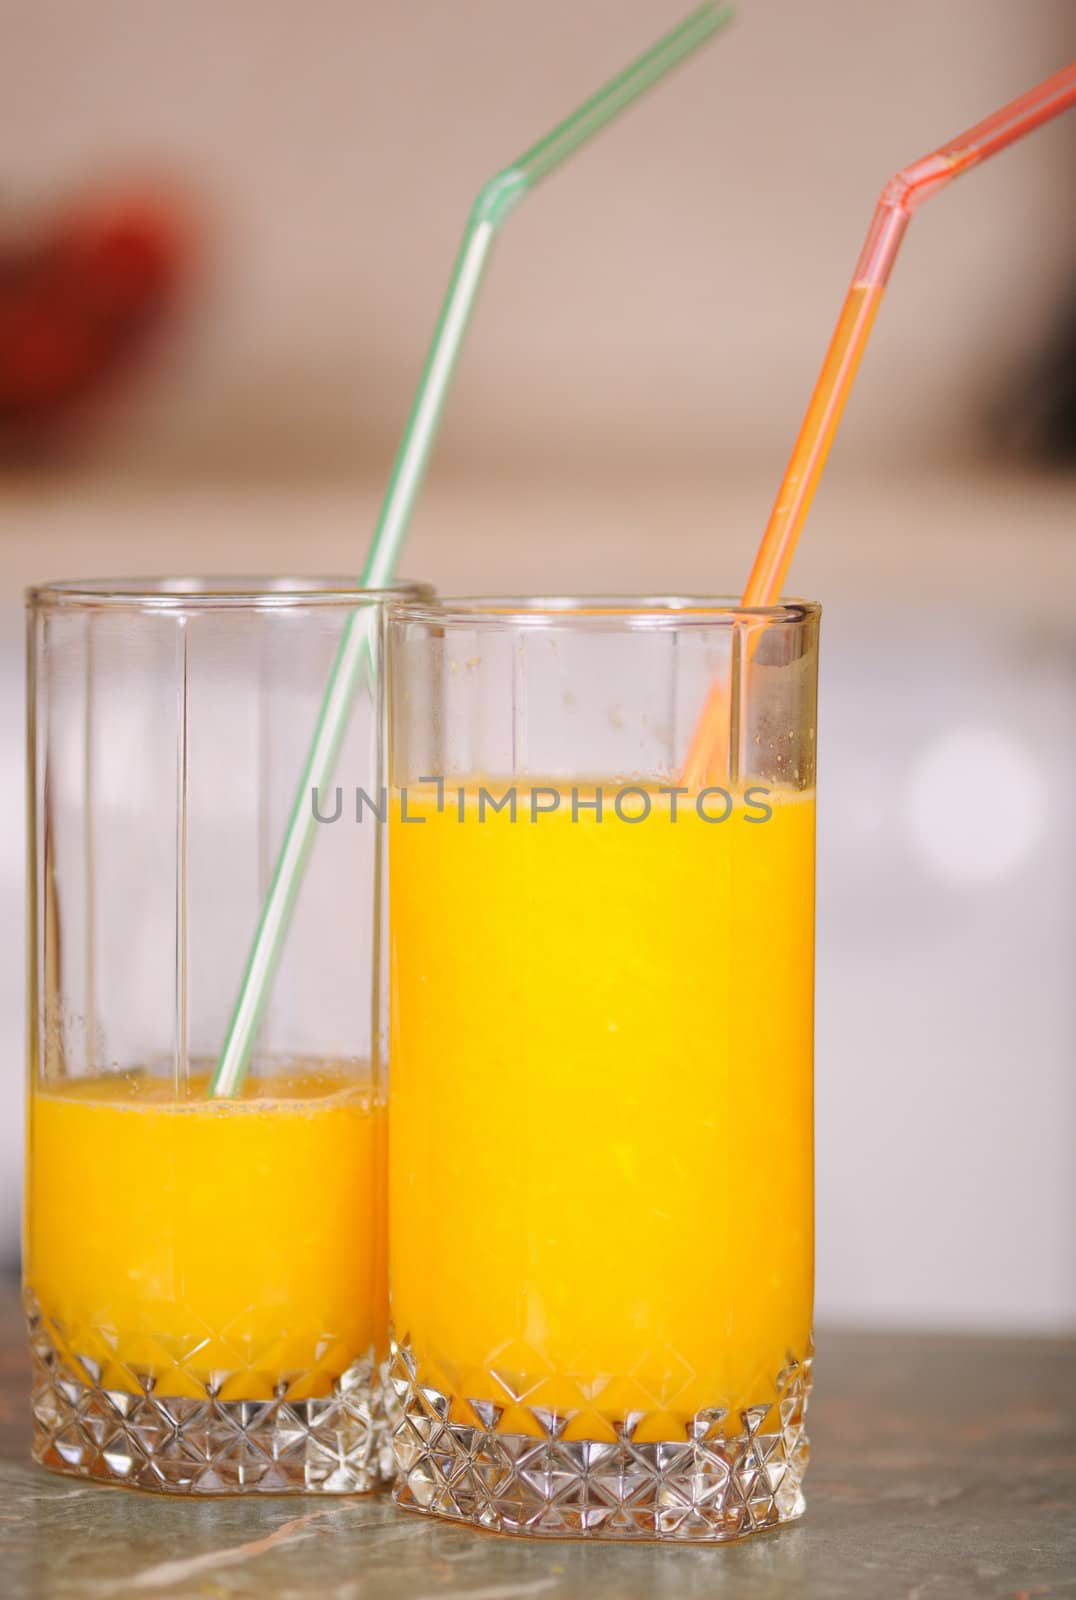 Orange juice in a glass on a table